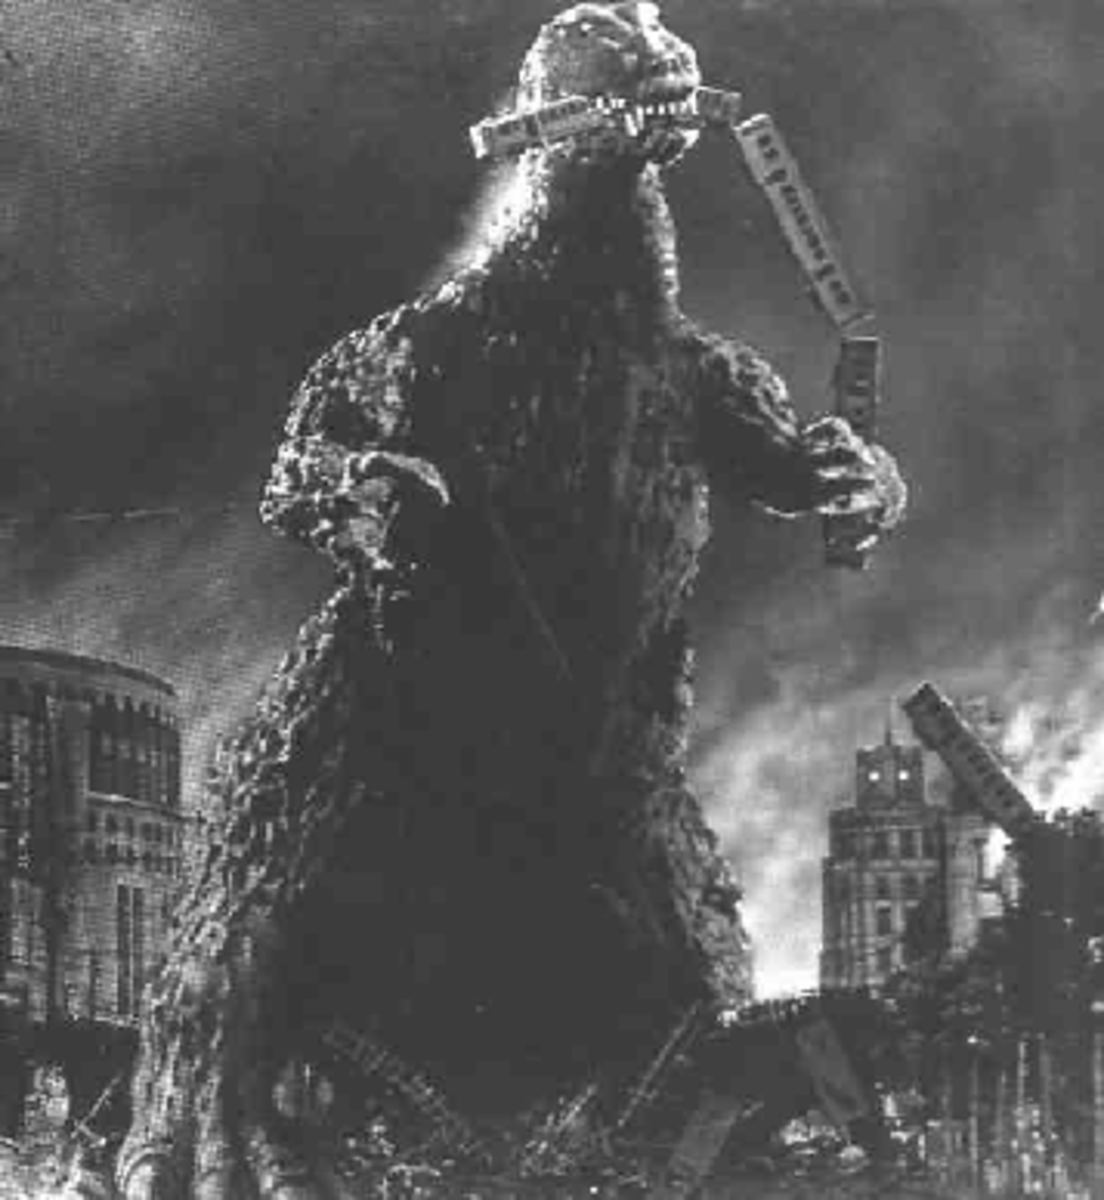 A Beginner's Guide to Godzilla Movies